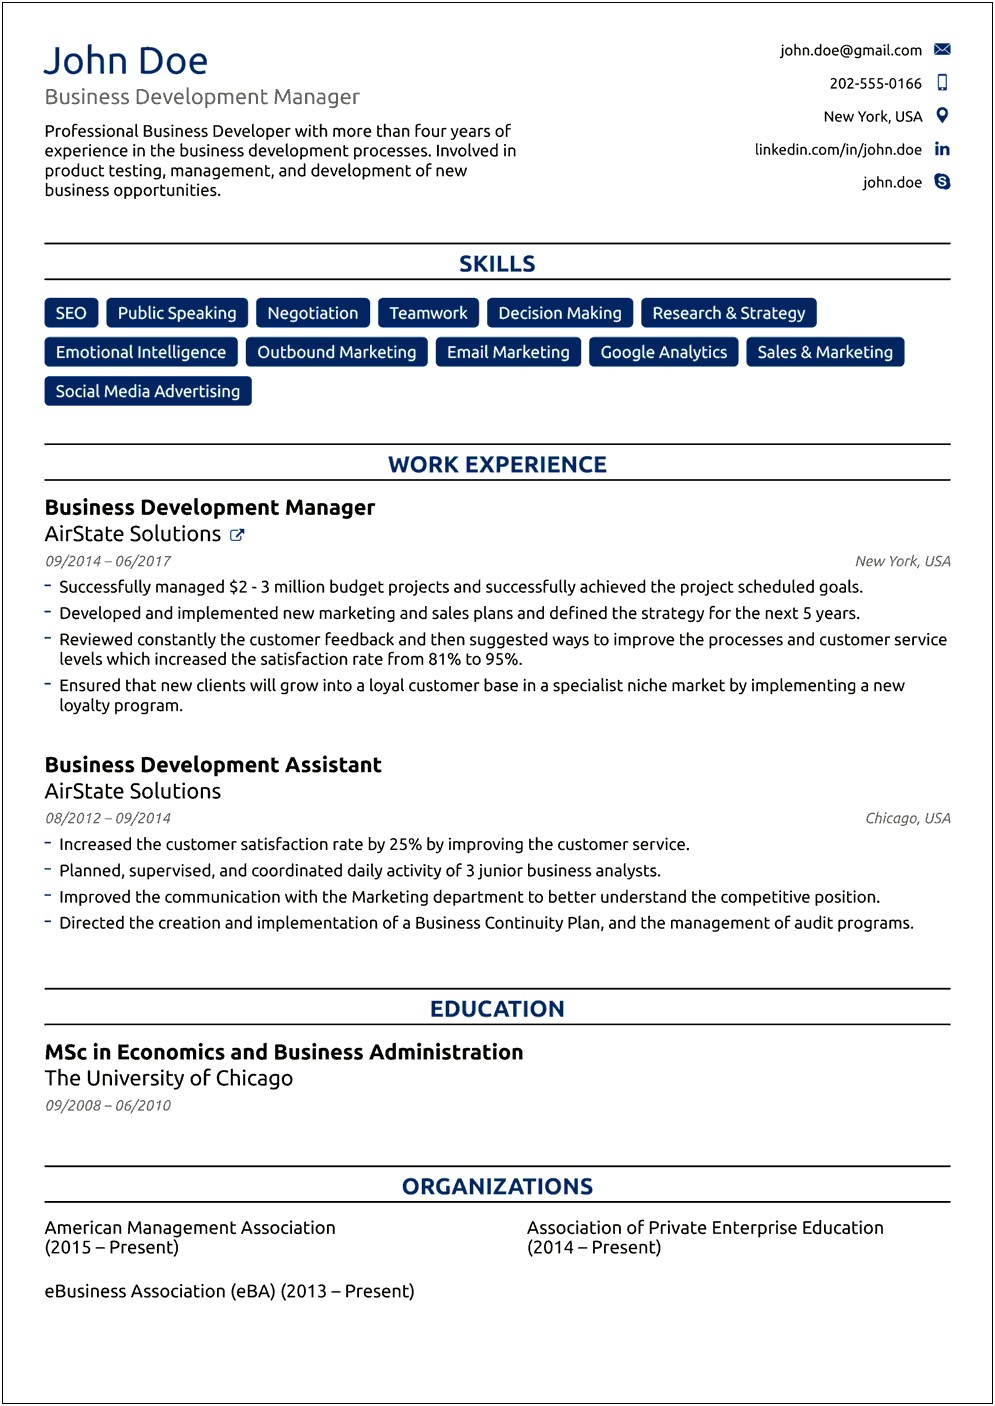 Resume Update After One Job